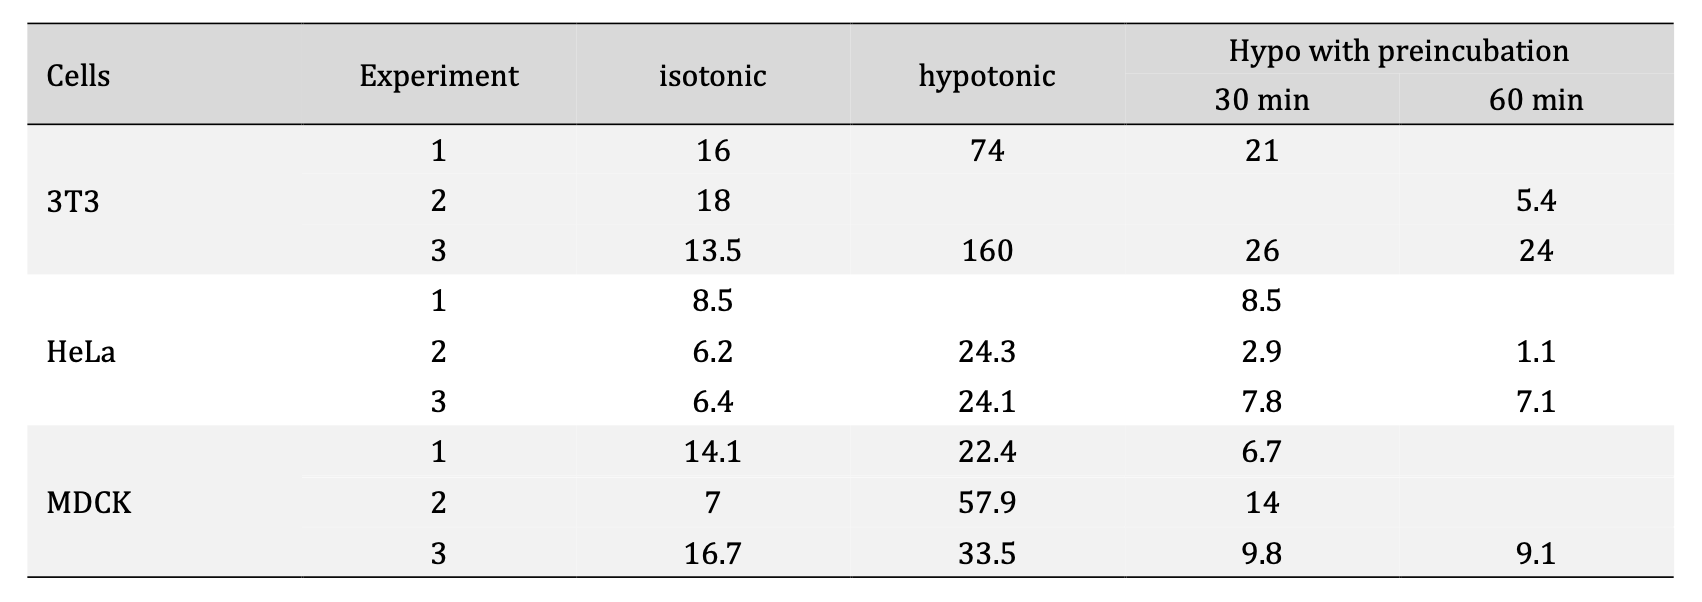 Table 1. Intracellular concentration of NaFl (μM) after a 10-min incubation with 266 μM NaFl under various conditions: in isotonic medium (100% DMEM), under hypotonic shock (50% DMEM) or in hypotonic medium, but with a 30-min or 60-min preincubation in hypotonic medium. The increase in NaFl accumulation under hypotonic conditions (without preincubation) compared to isotonic control was significant (p< 0.05 by Student’s t-test)